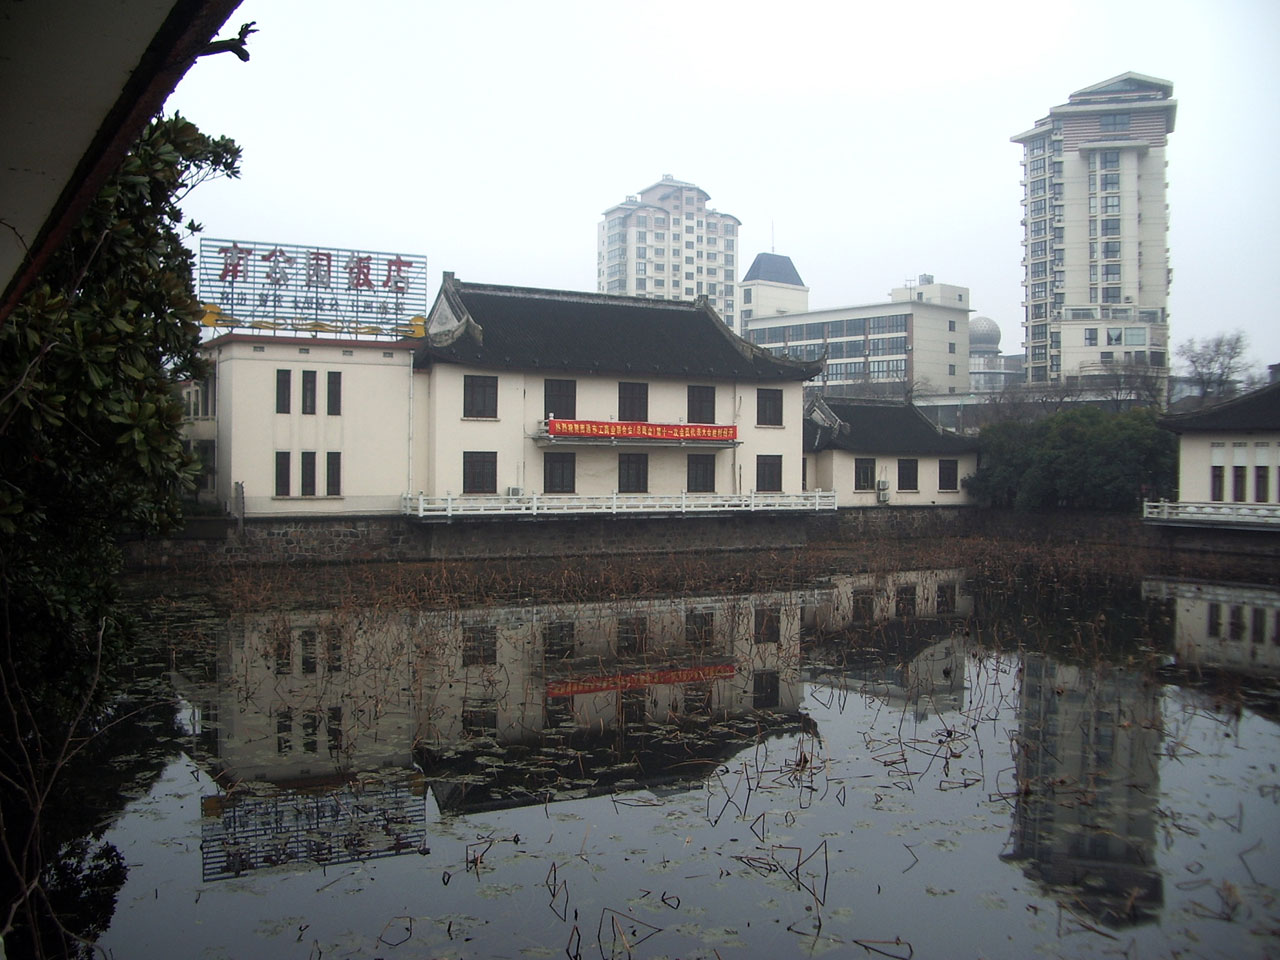 Building And Pond